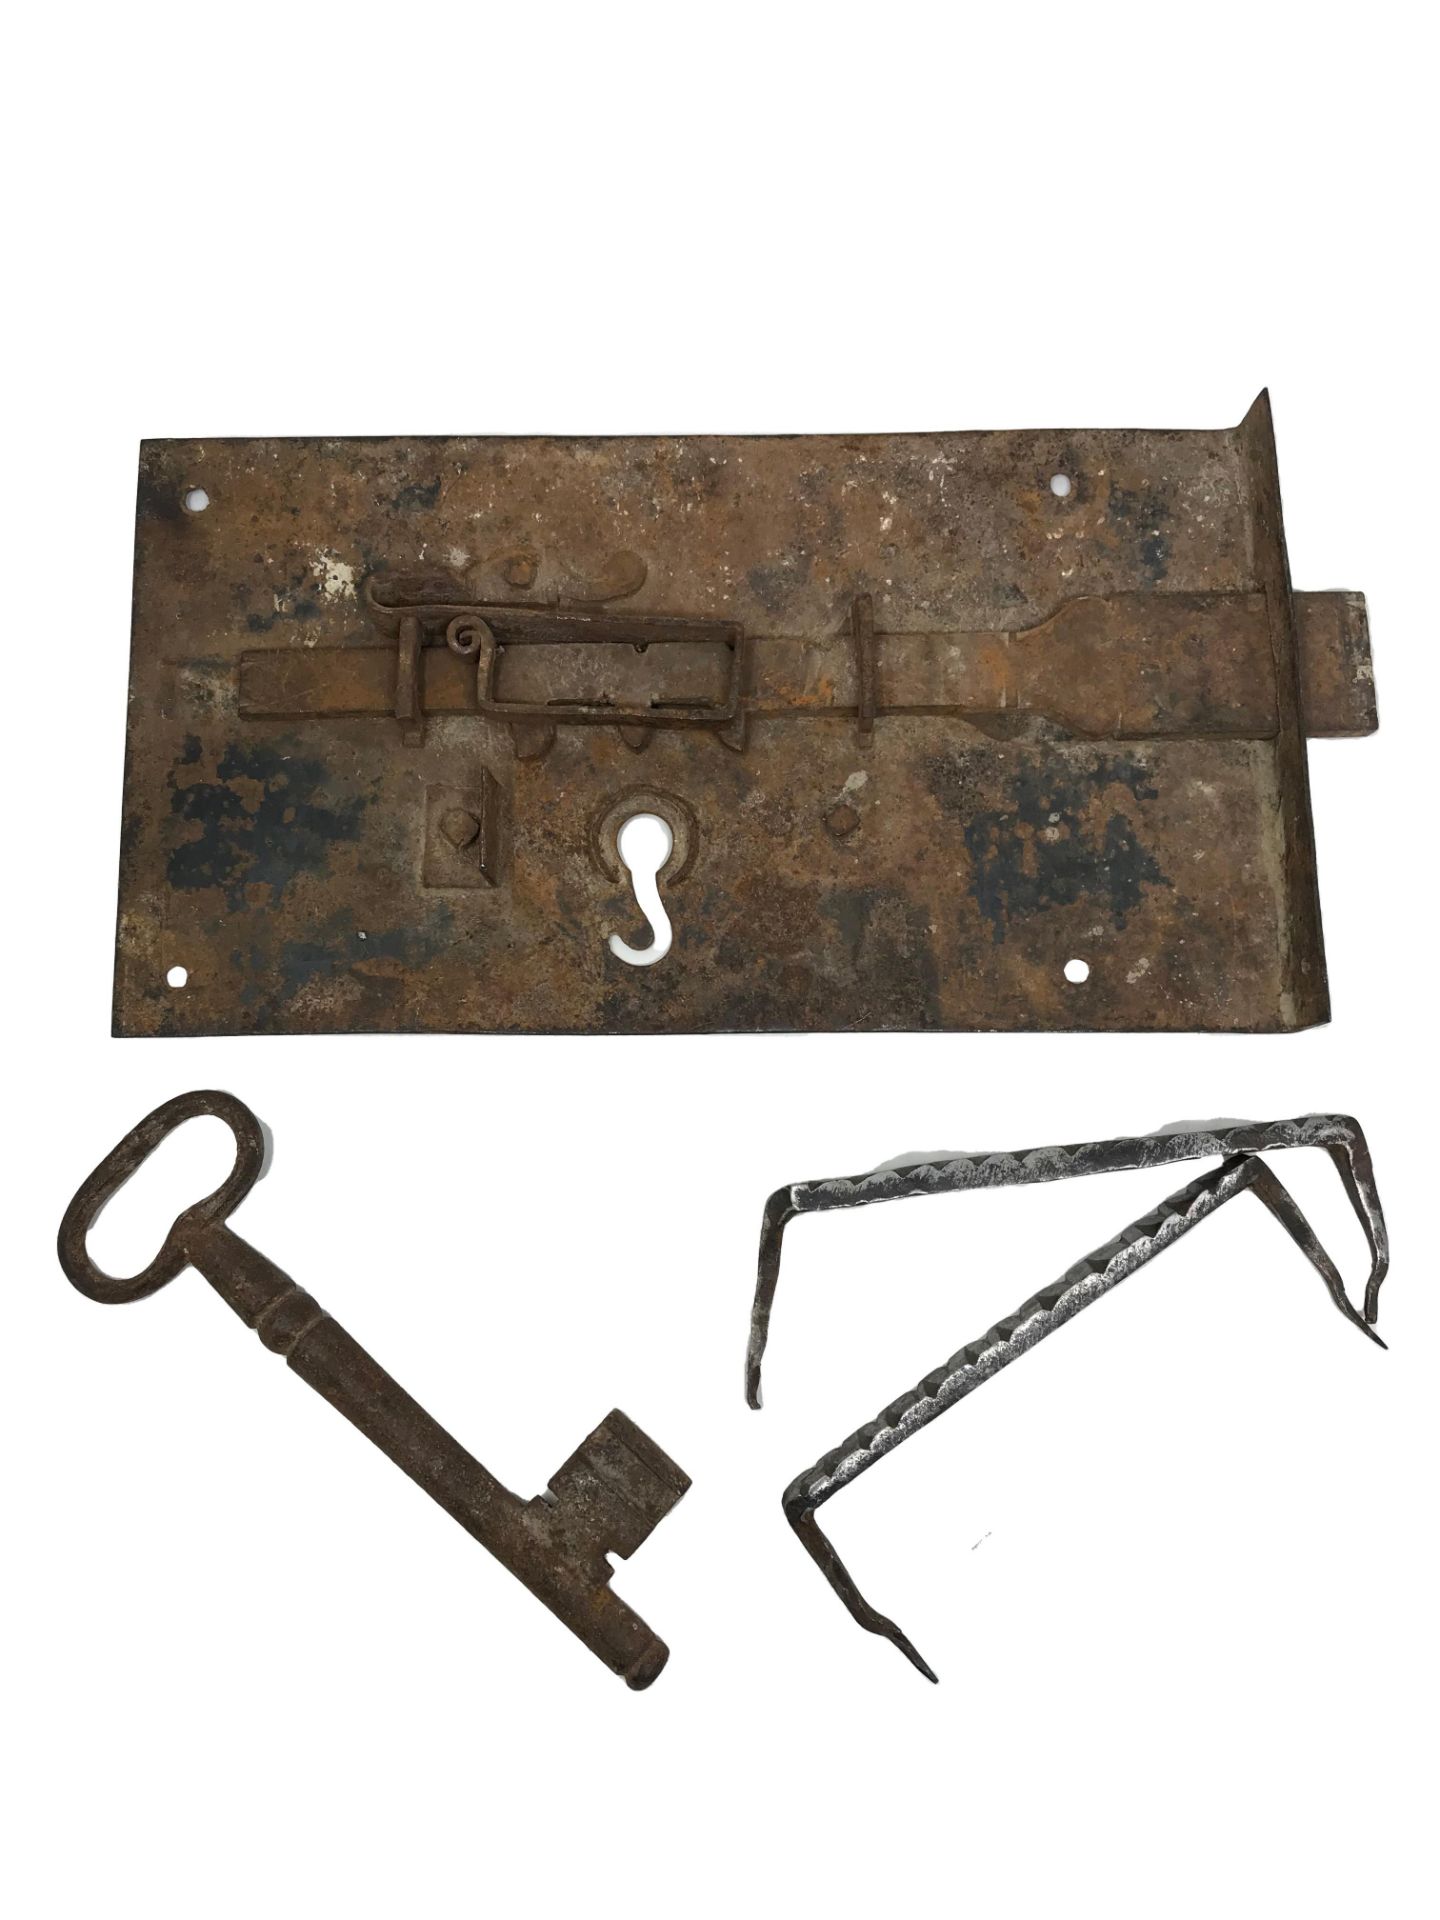 One lock, one key and two lock spikes. Lock: 16,8 x 33,2 cm - key: 18,5 cm - spikes: 14,5 - 15,5 - Image 2 of 2